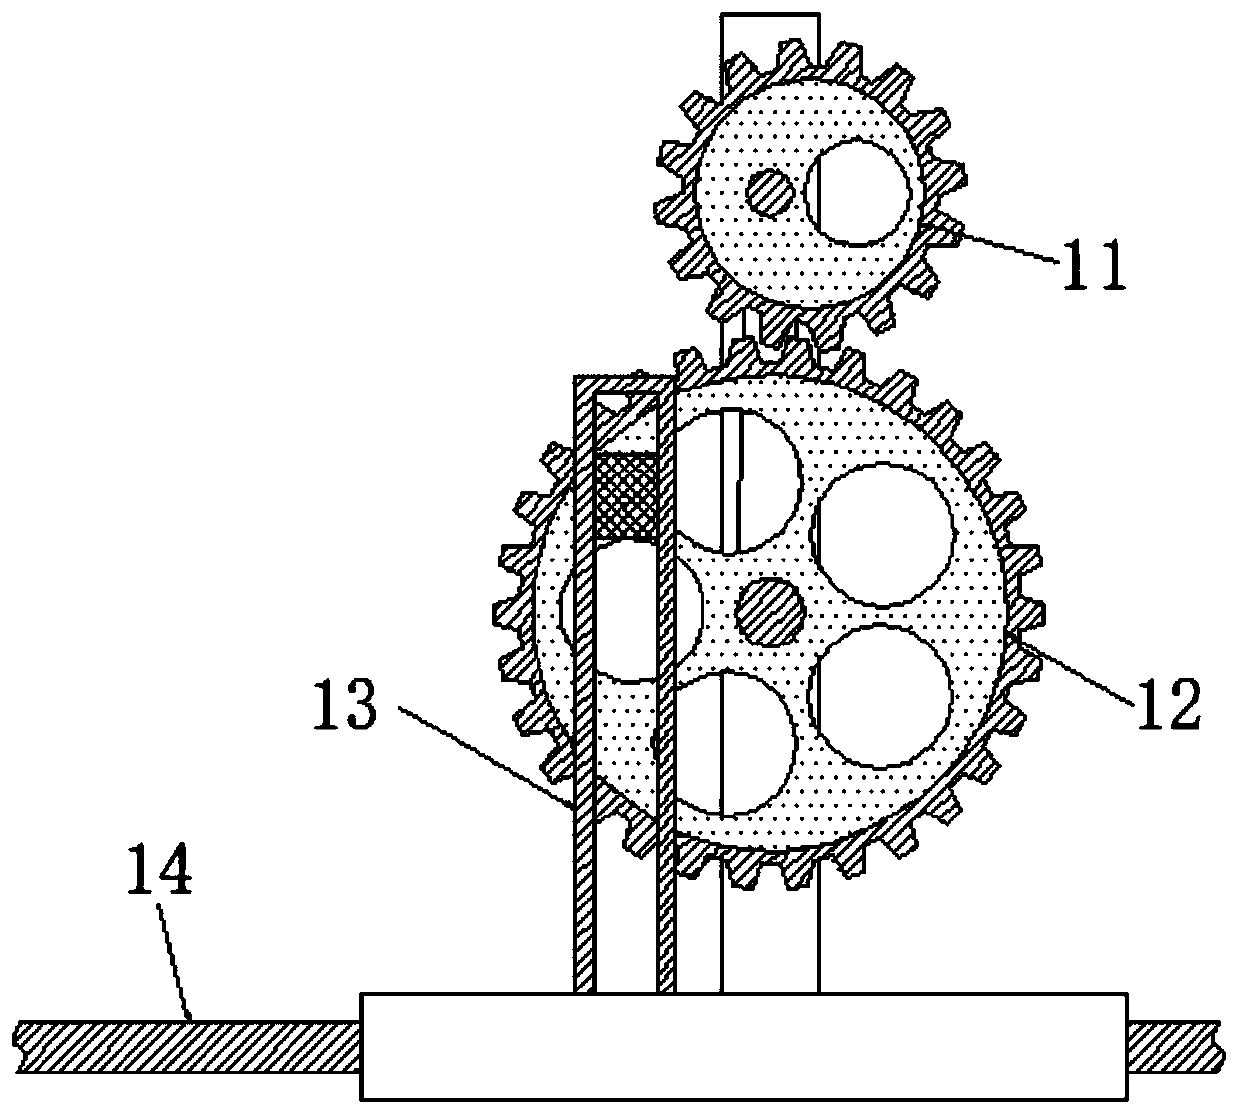 Spinning winding device capable of achieving quantitative winding and uniform winding based on reciprocating motion